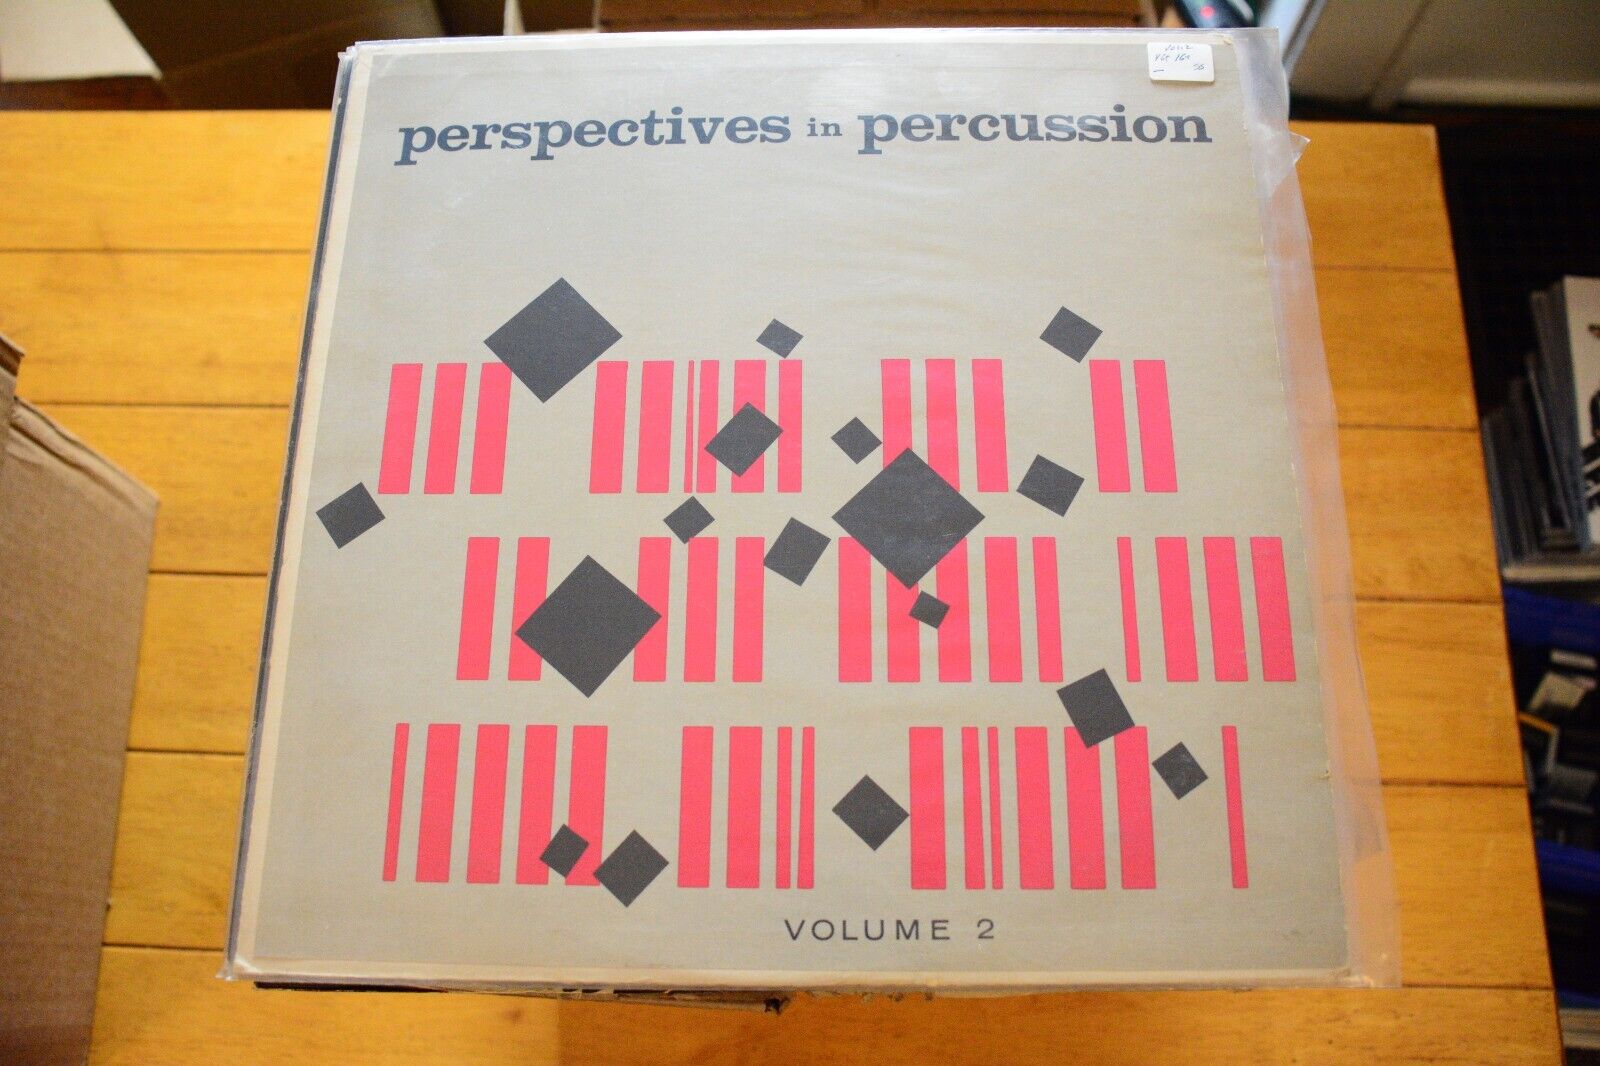 SKIP MARTIN PERSPECTIVES IN PERCUSSION VOL 2 SONIC WORKSHOP LP 12